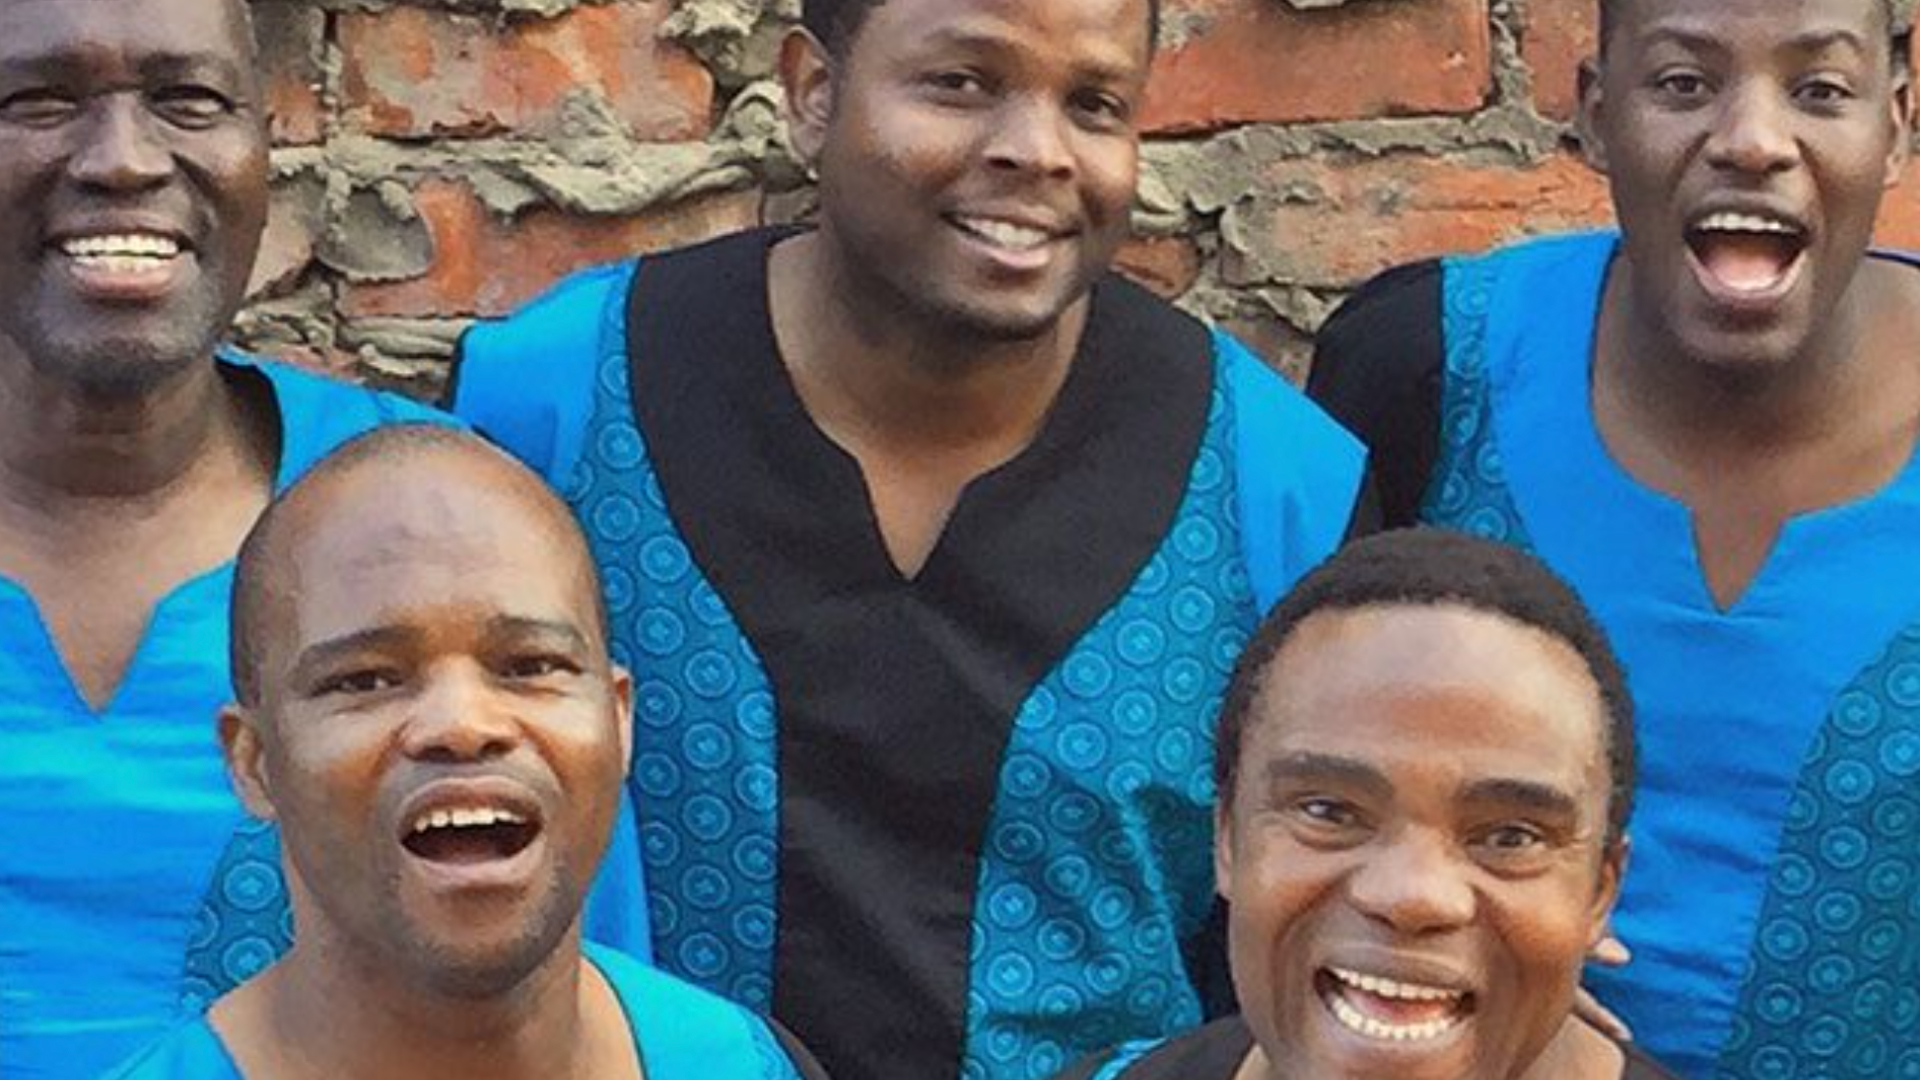 all-male choral group from South Africa